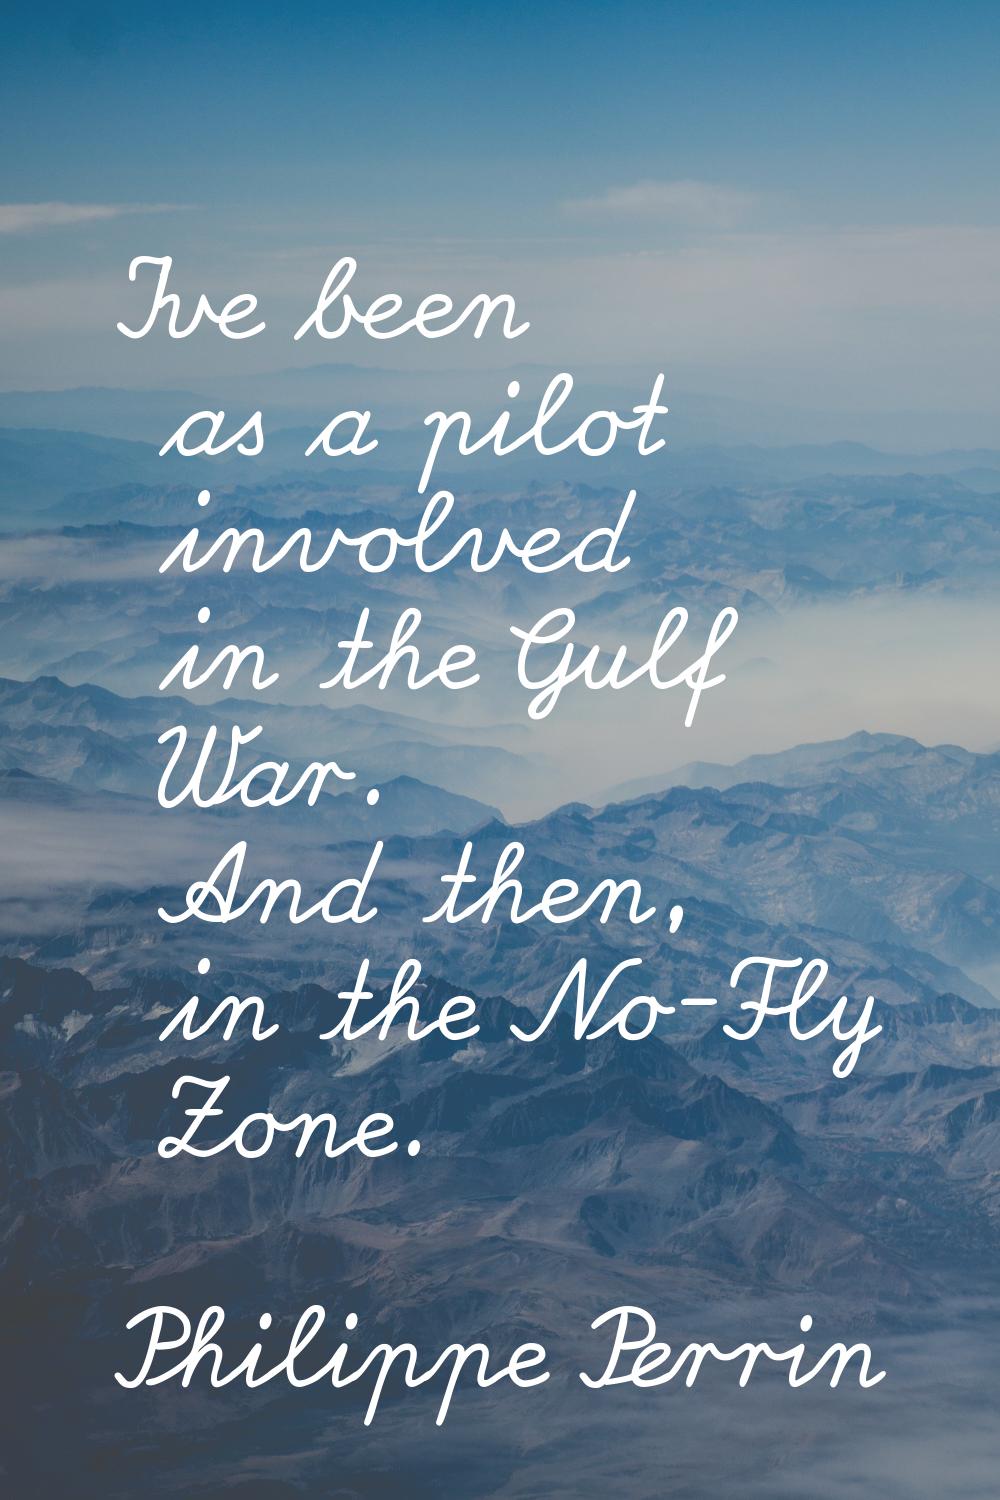 I've been as a pilot involved in the Gulf War. And then, in the No-Fly Zone.